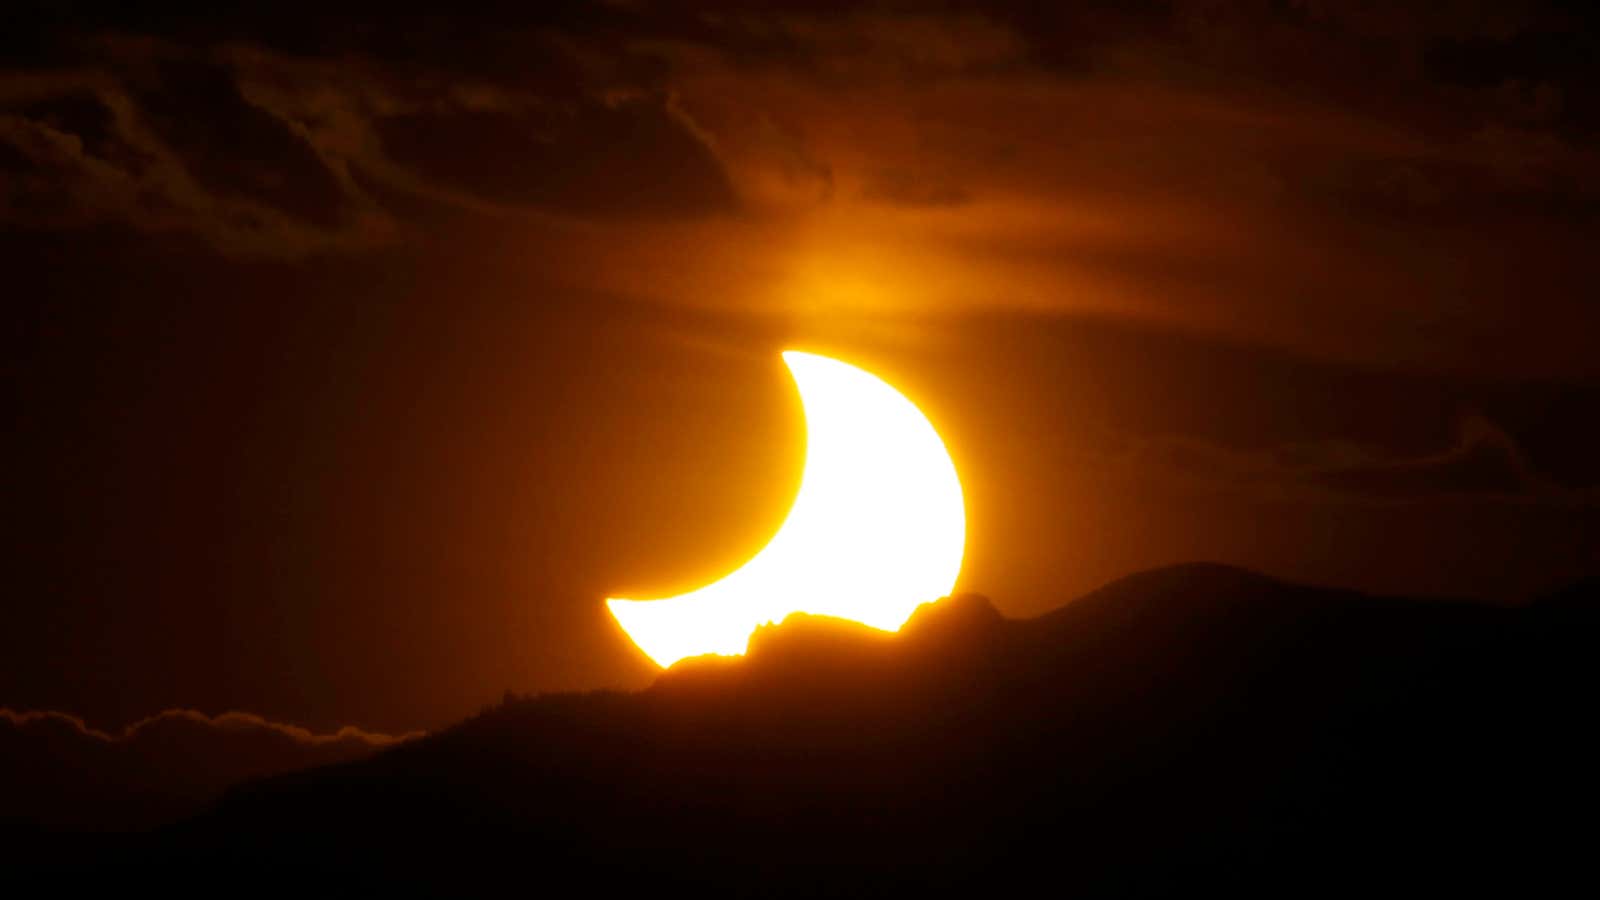 This—from the solar eclipse of May 20, 2012—is likely not what you’ll see on Monday.